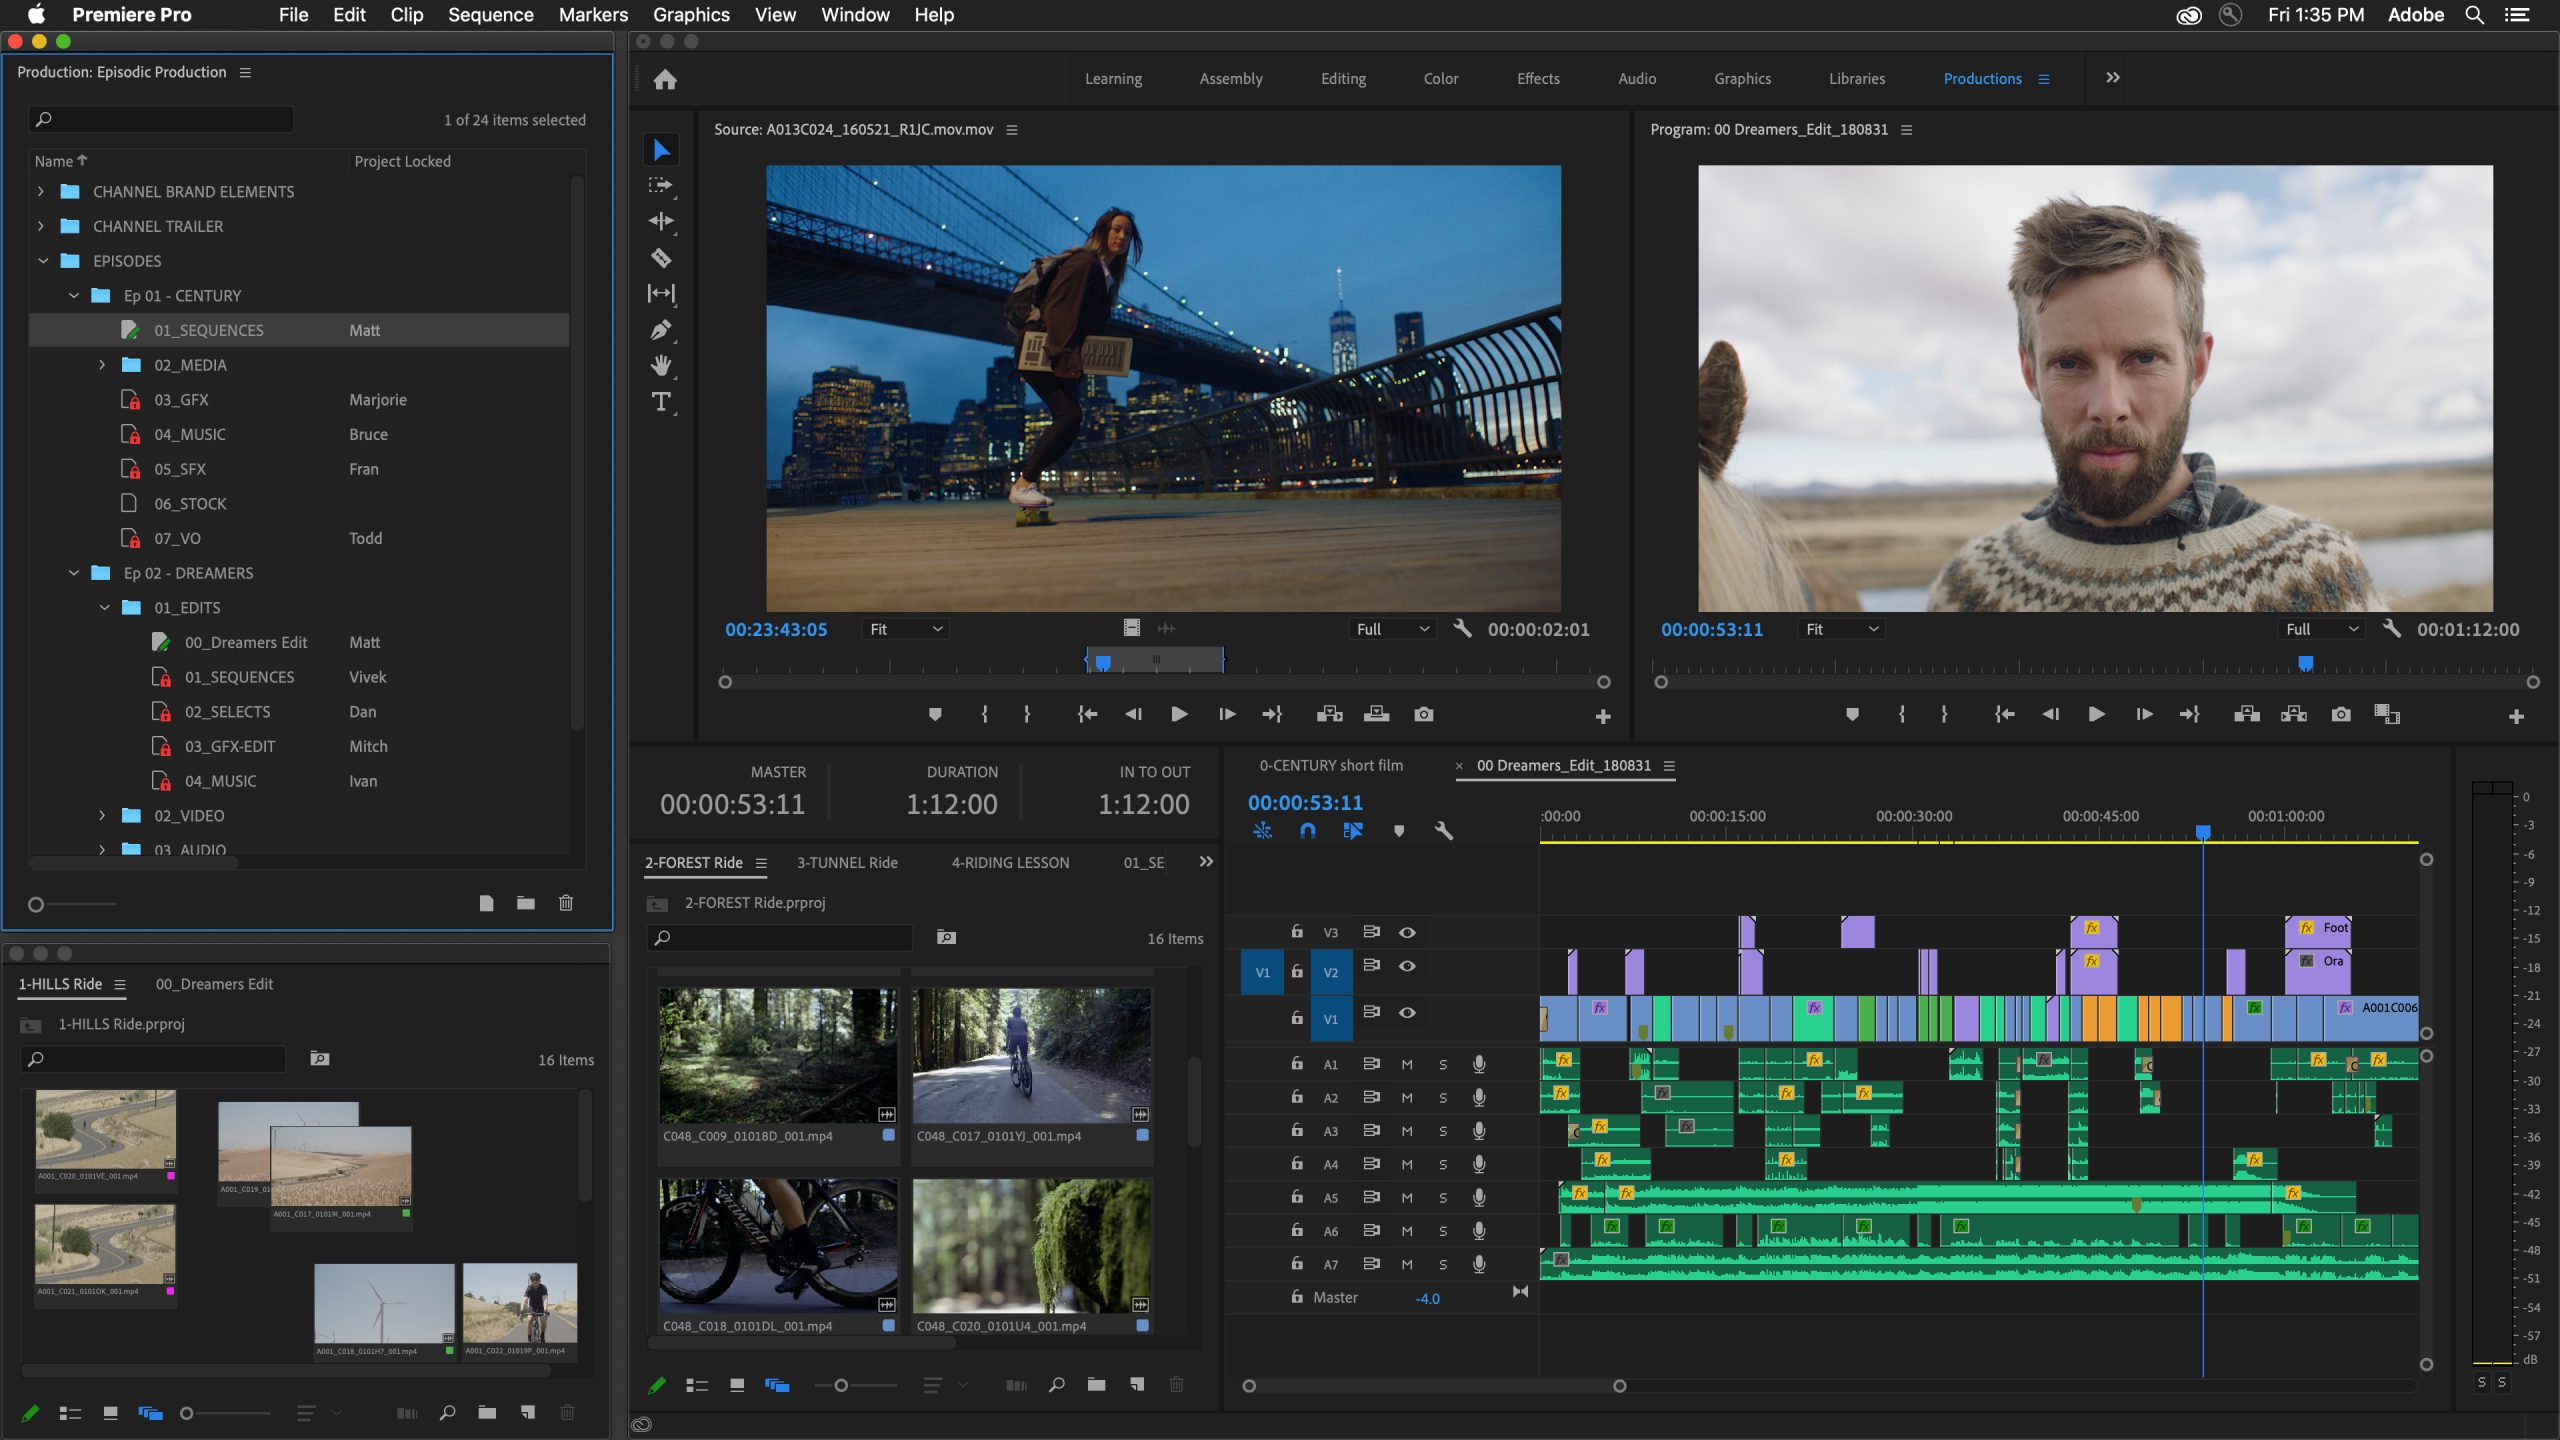 Adobe Premiere Pro Powerful & Easy Video Editor Software